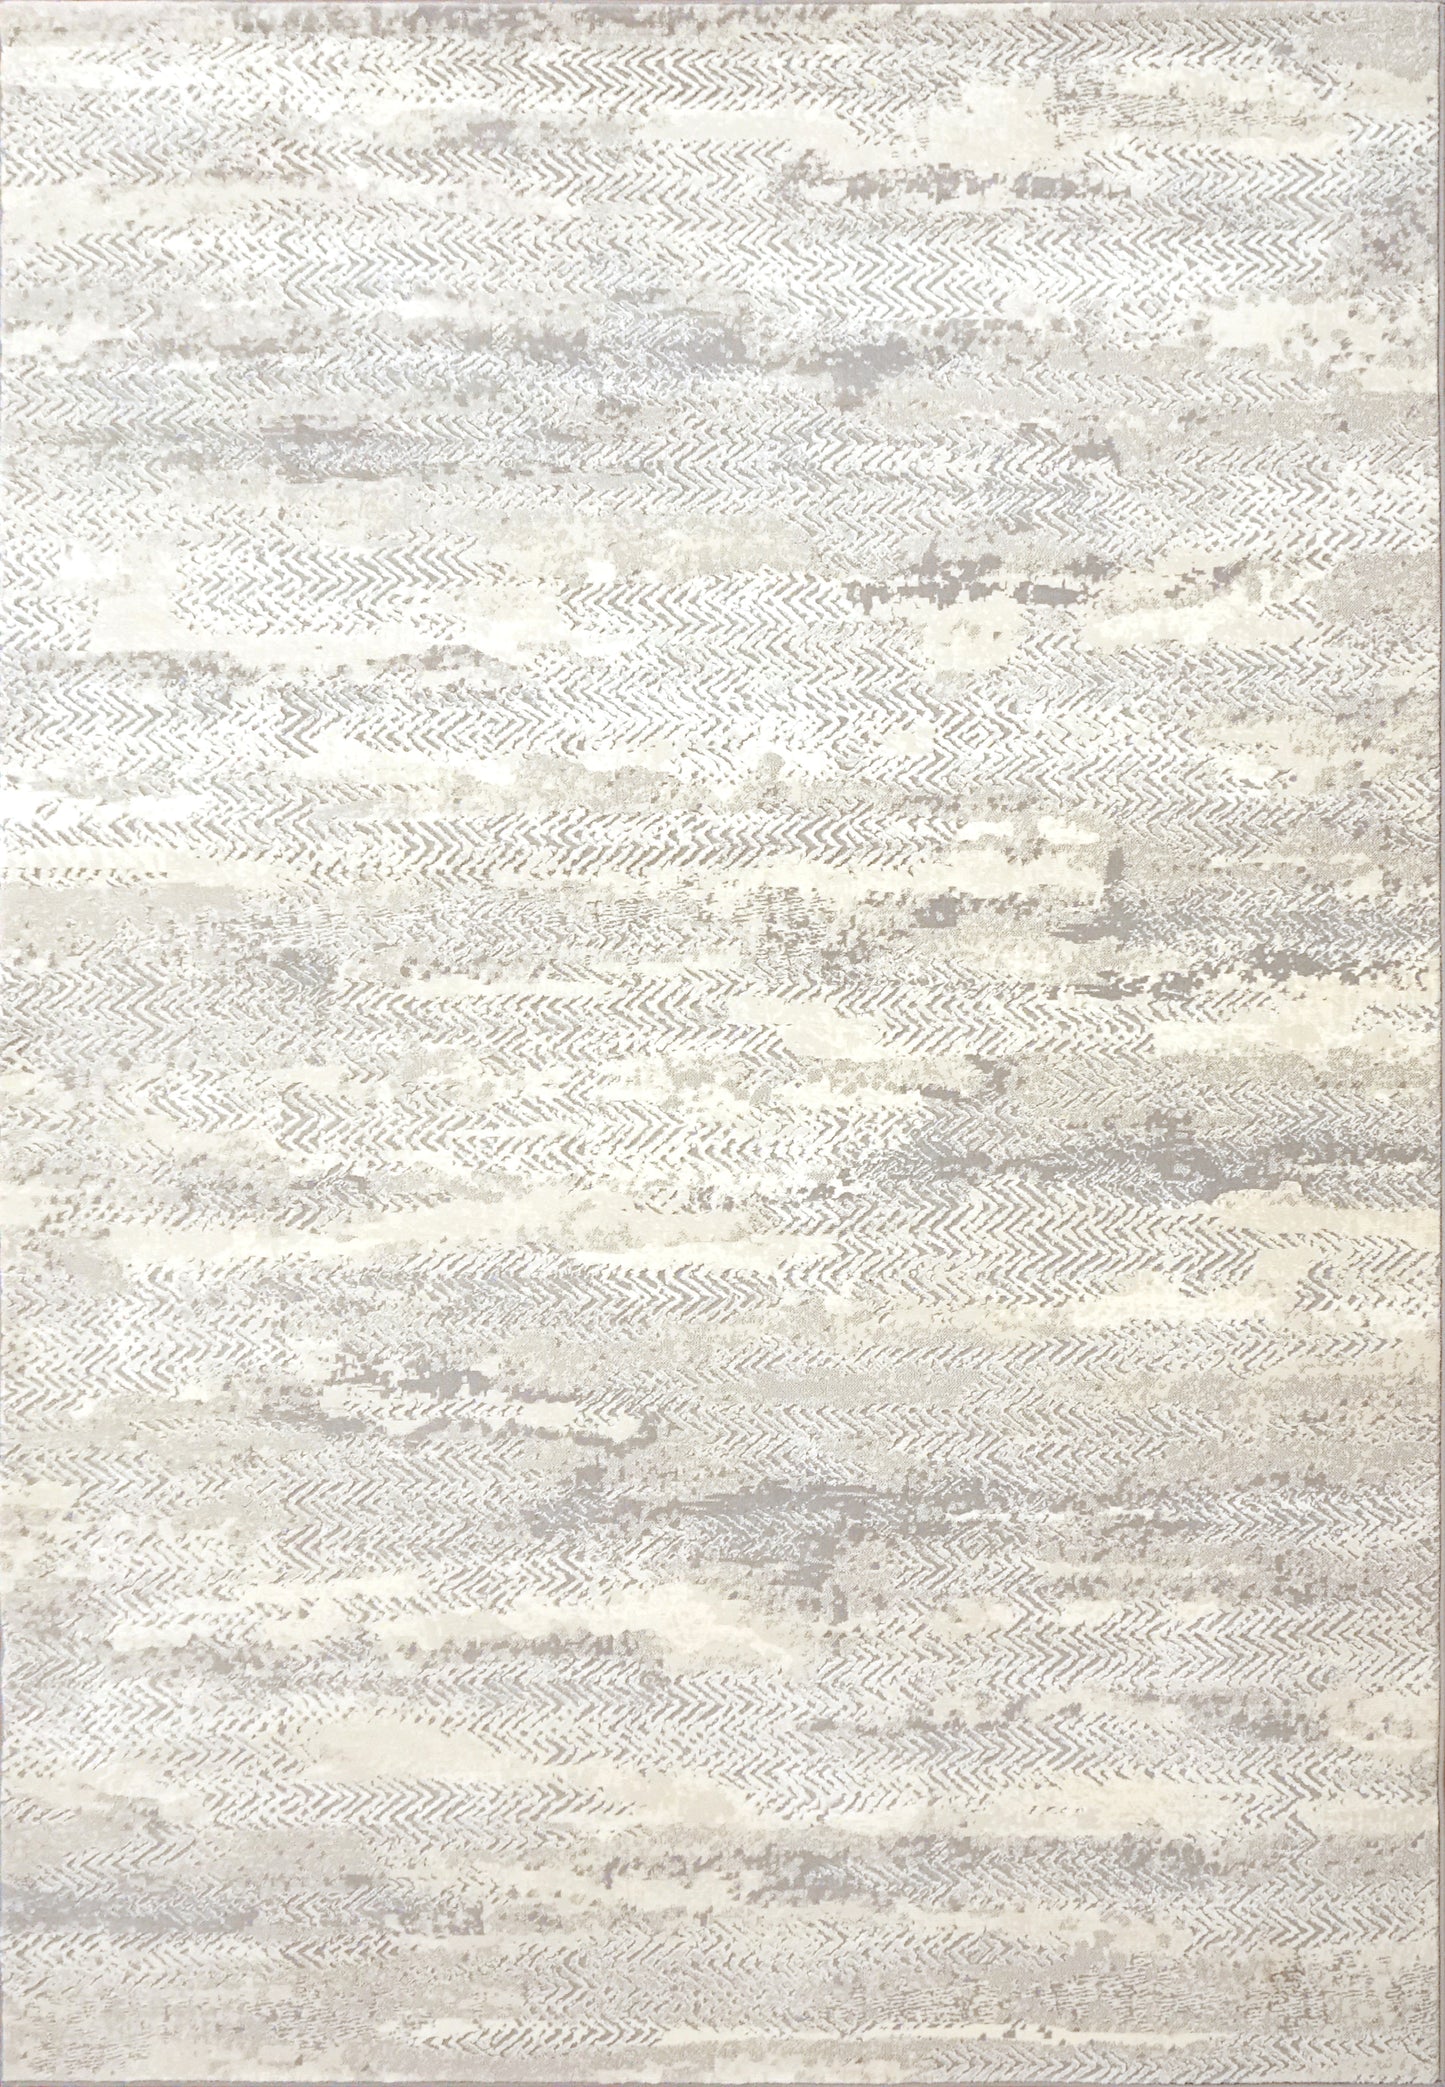 Couture 52028-6424 Grey Area Rug